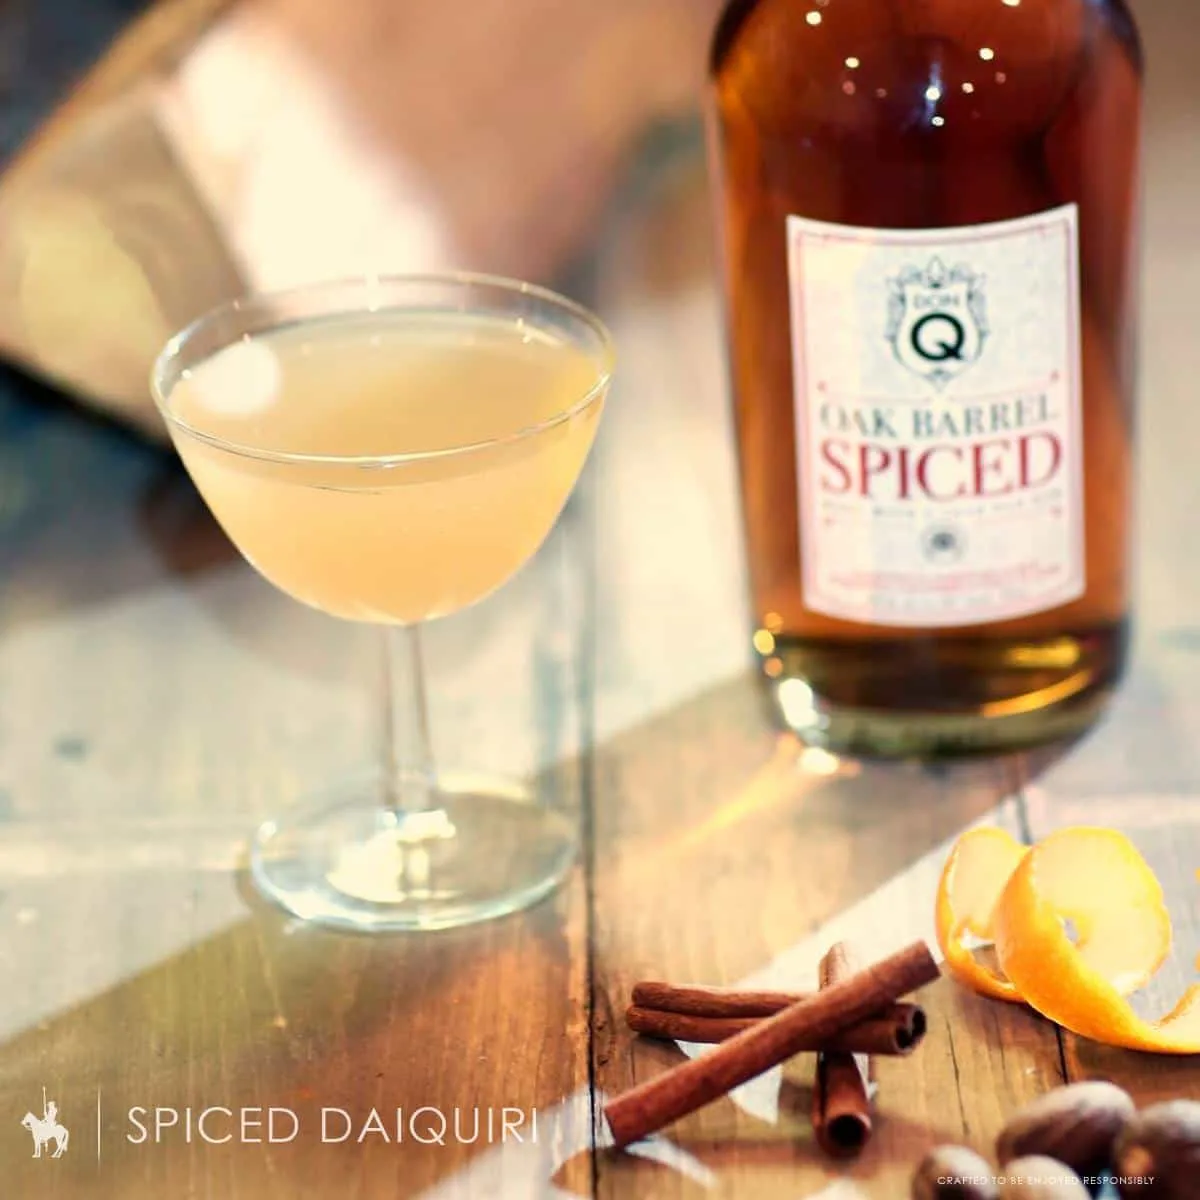 Kick up your Daiquiri a notch with Don Q Oak Barrel Spiced rum. TravelingWellForLess.com